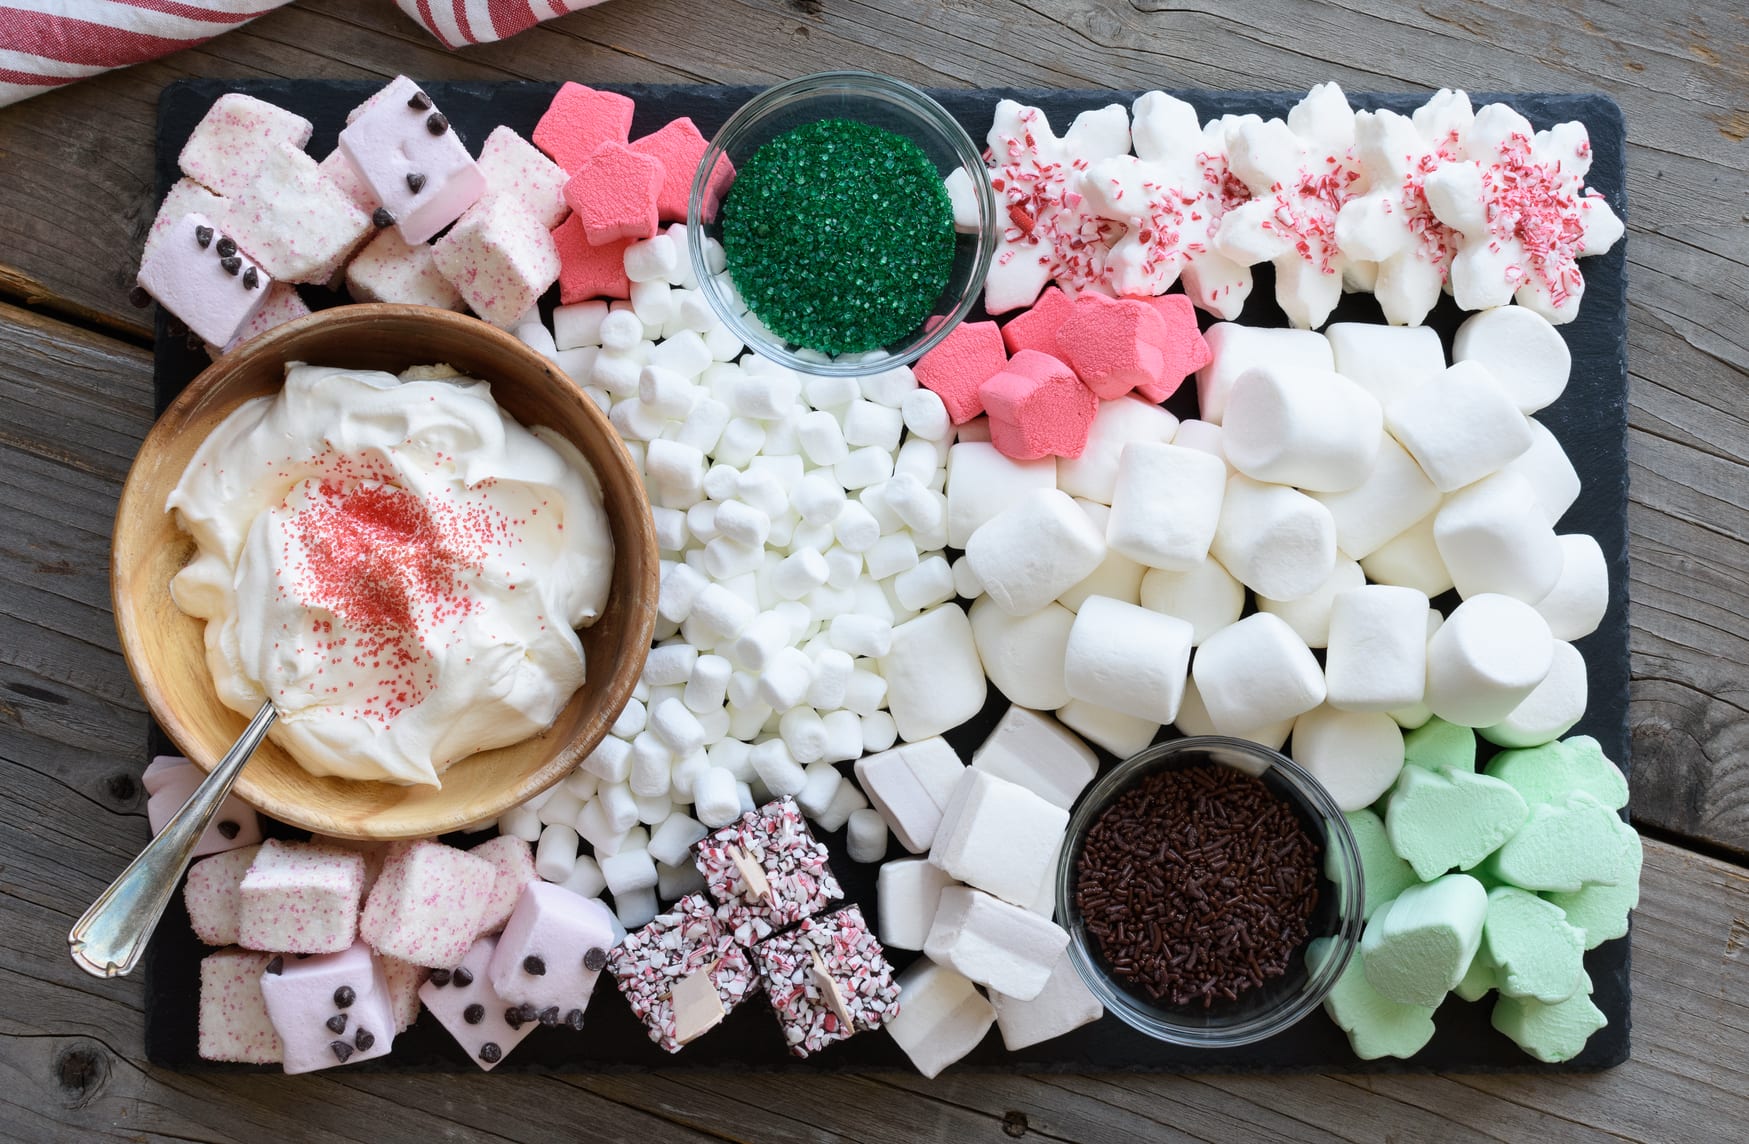 overhead shot of a variation on a charcuterie board, but with hot chocolate fixings instead of meats and cheeses. The board includes a variety of marshmallows, chocolate sprinkles, green sprinkles, chocolate and peppermint coated wooden spoons, and whipped cream